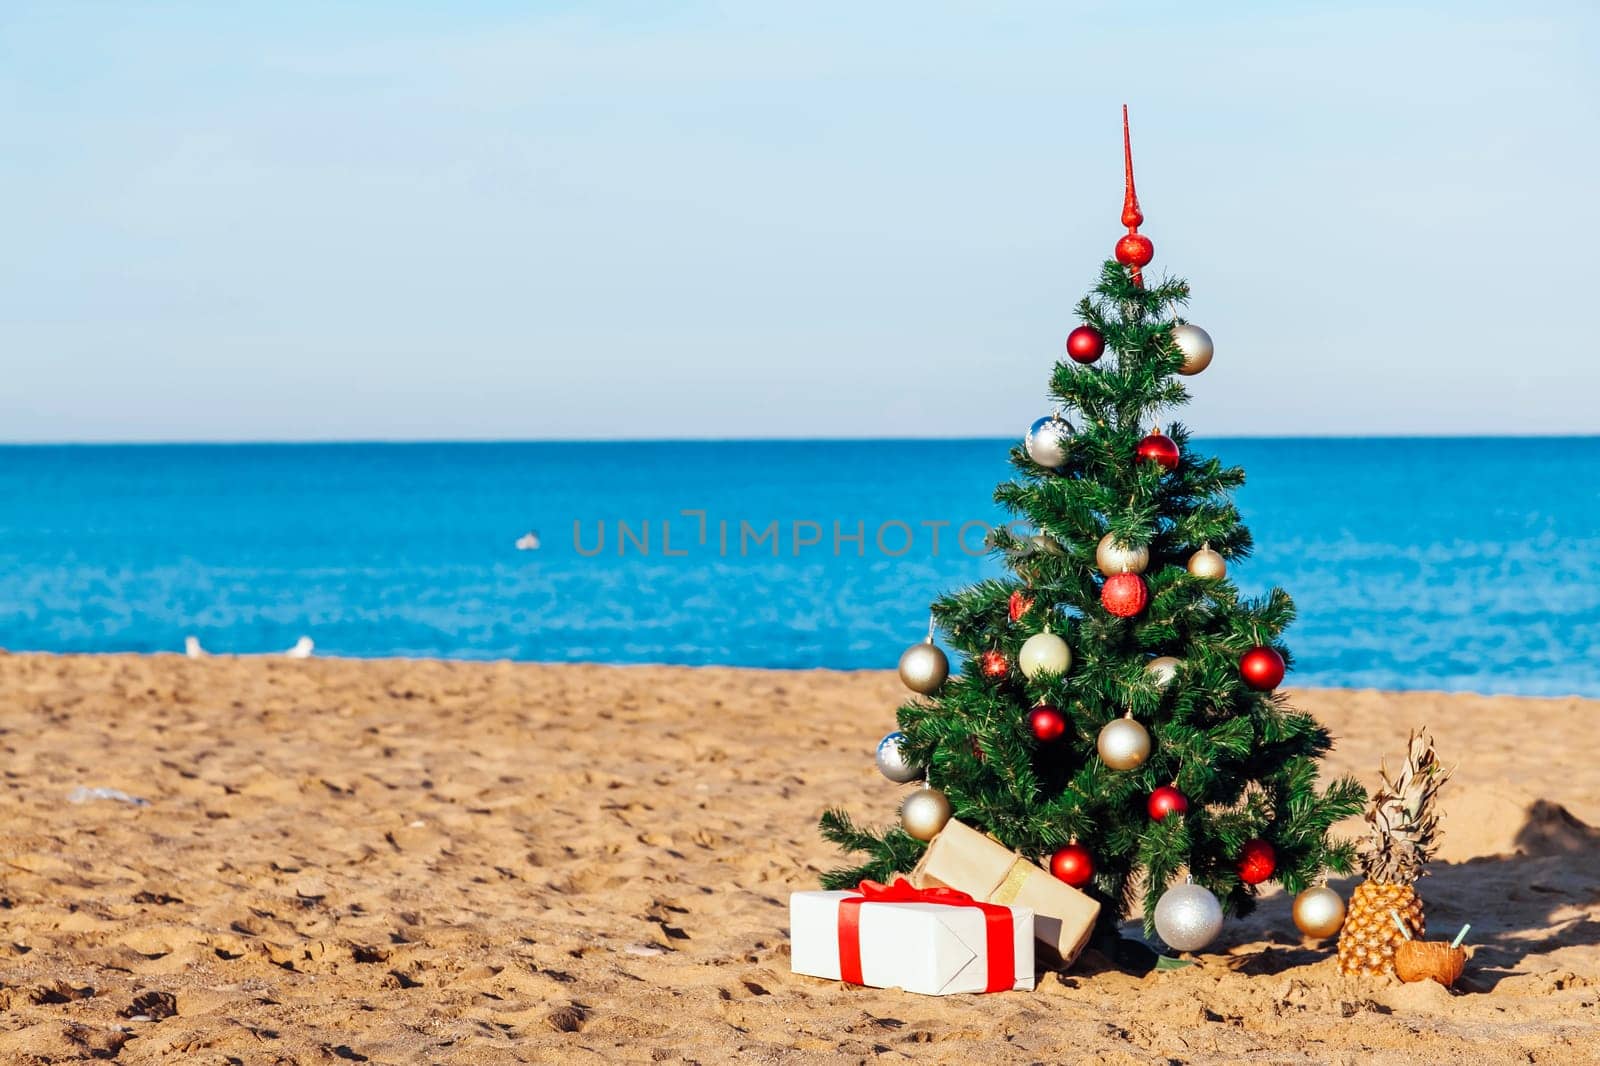 Christmas on the beach with gifts for the new year